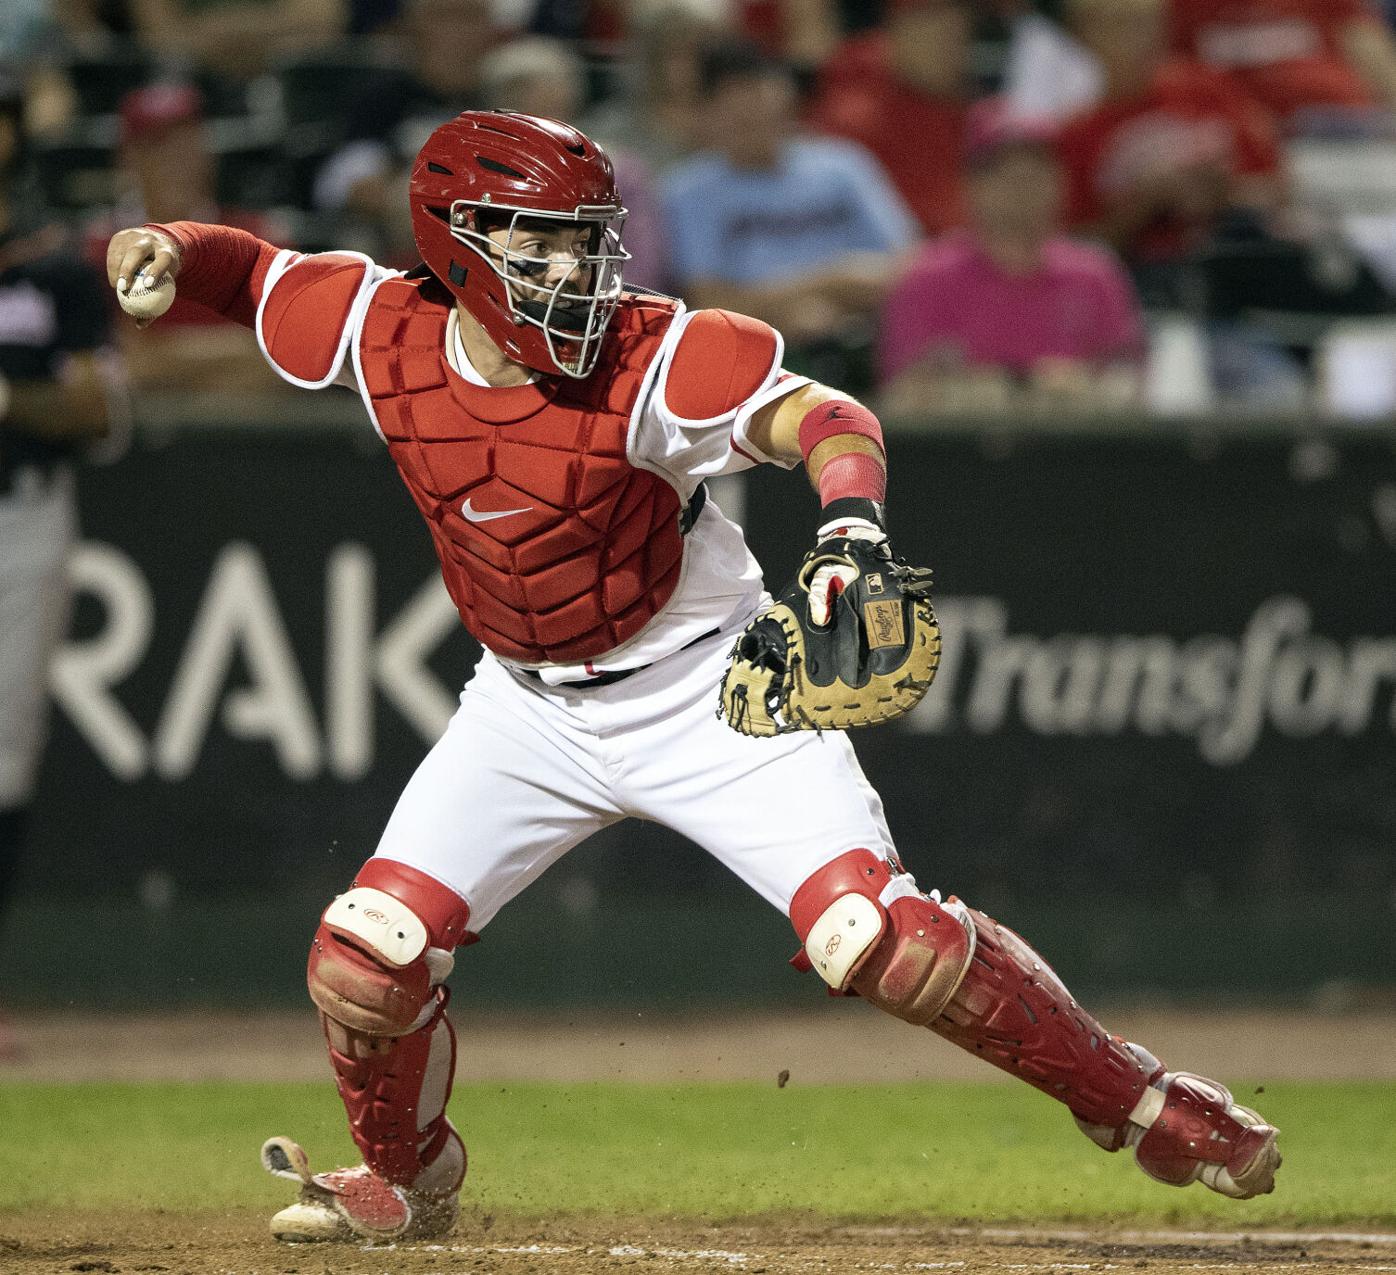 Check out the amazing gear that will turn Atlantic League catchers